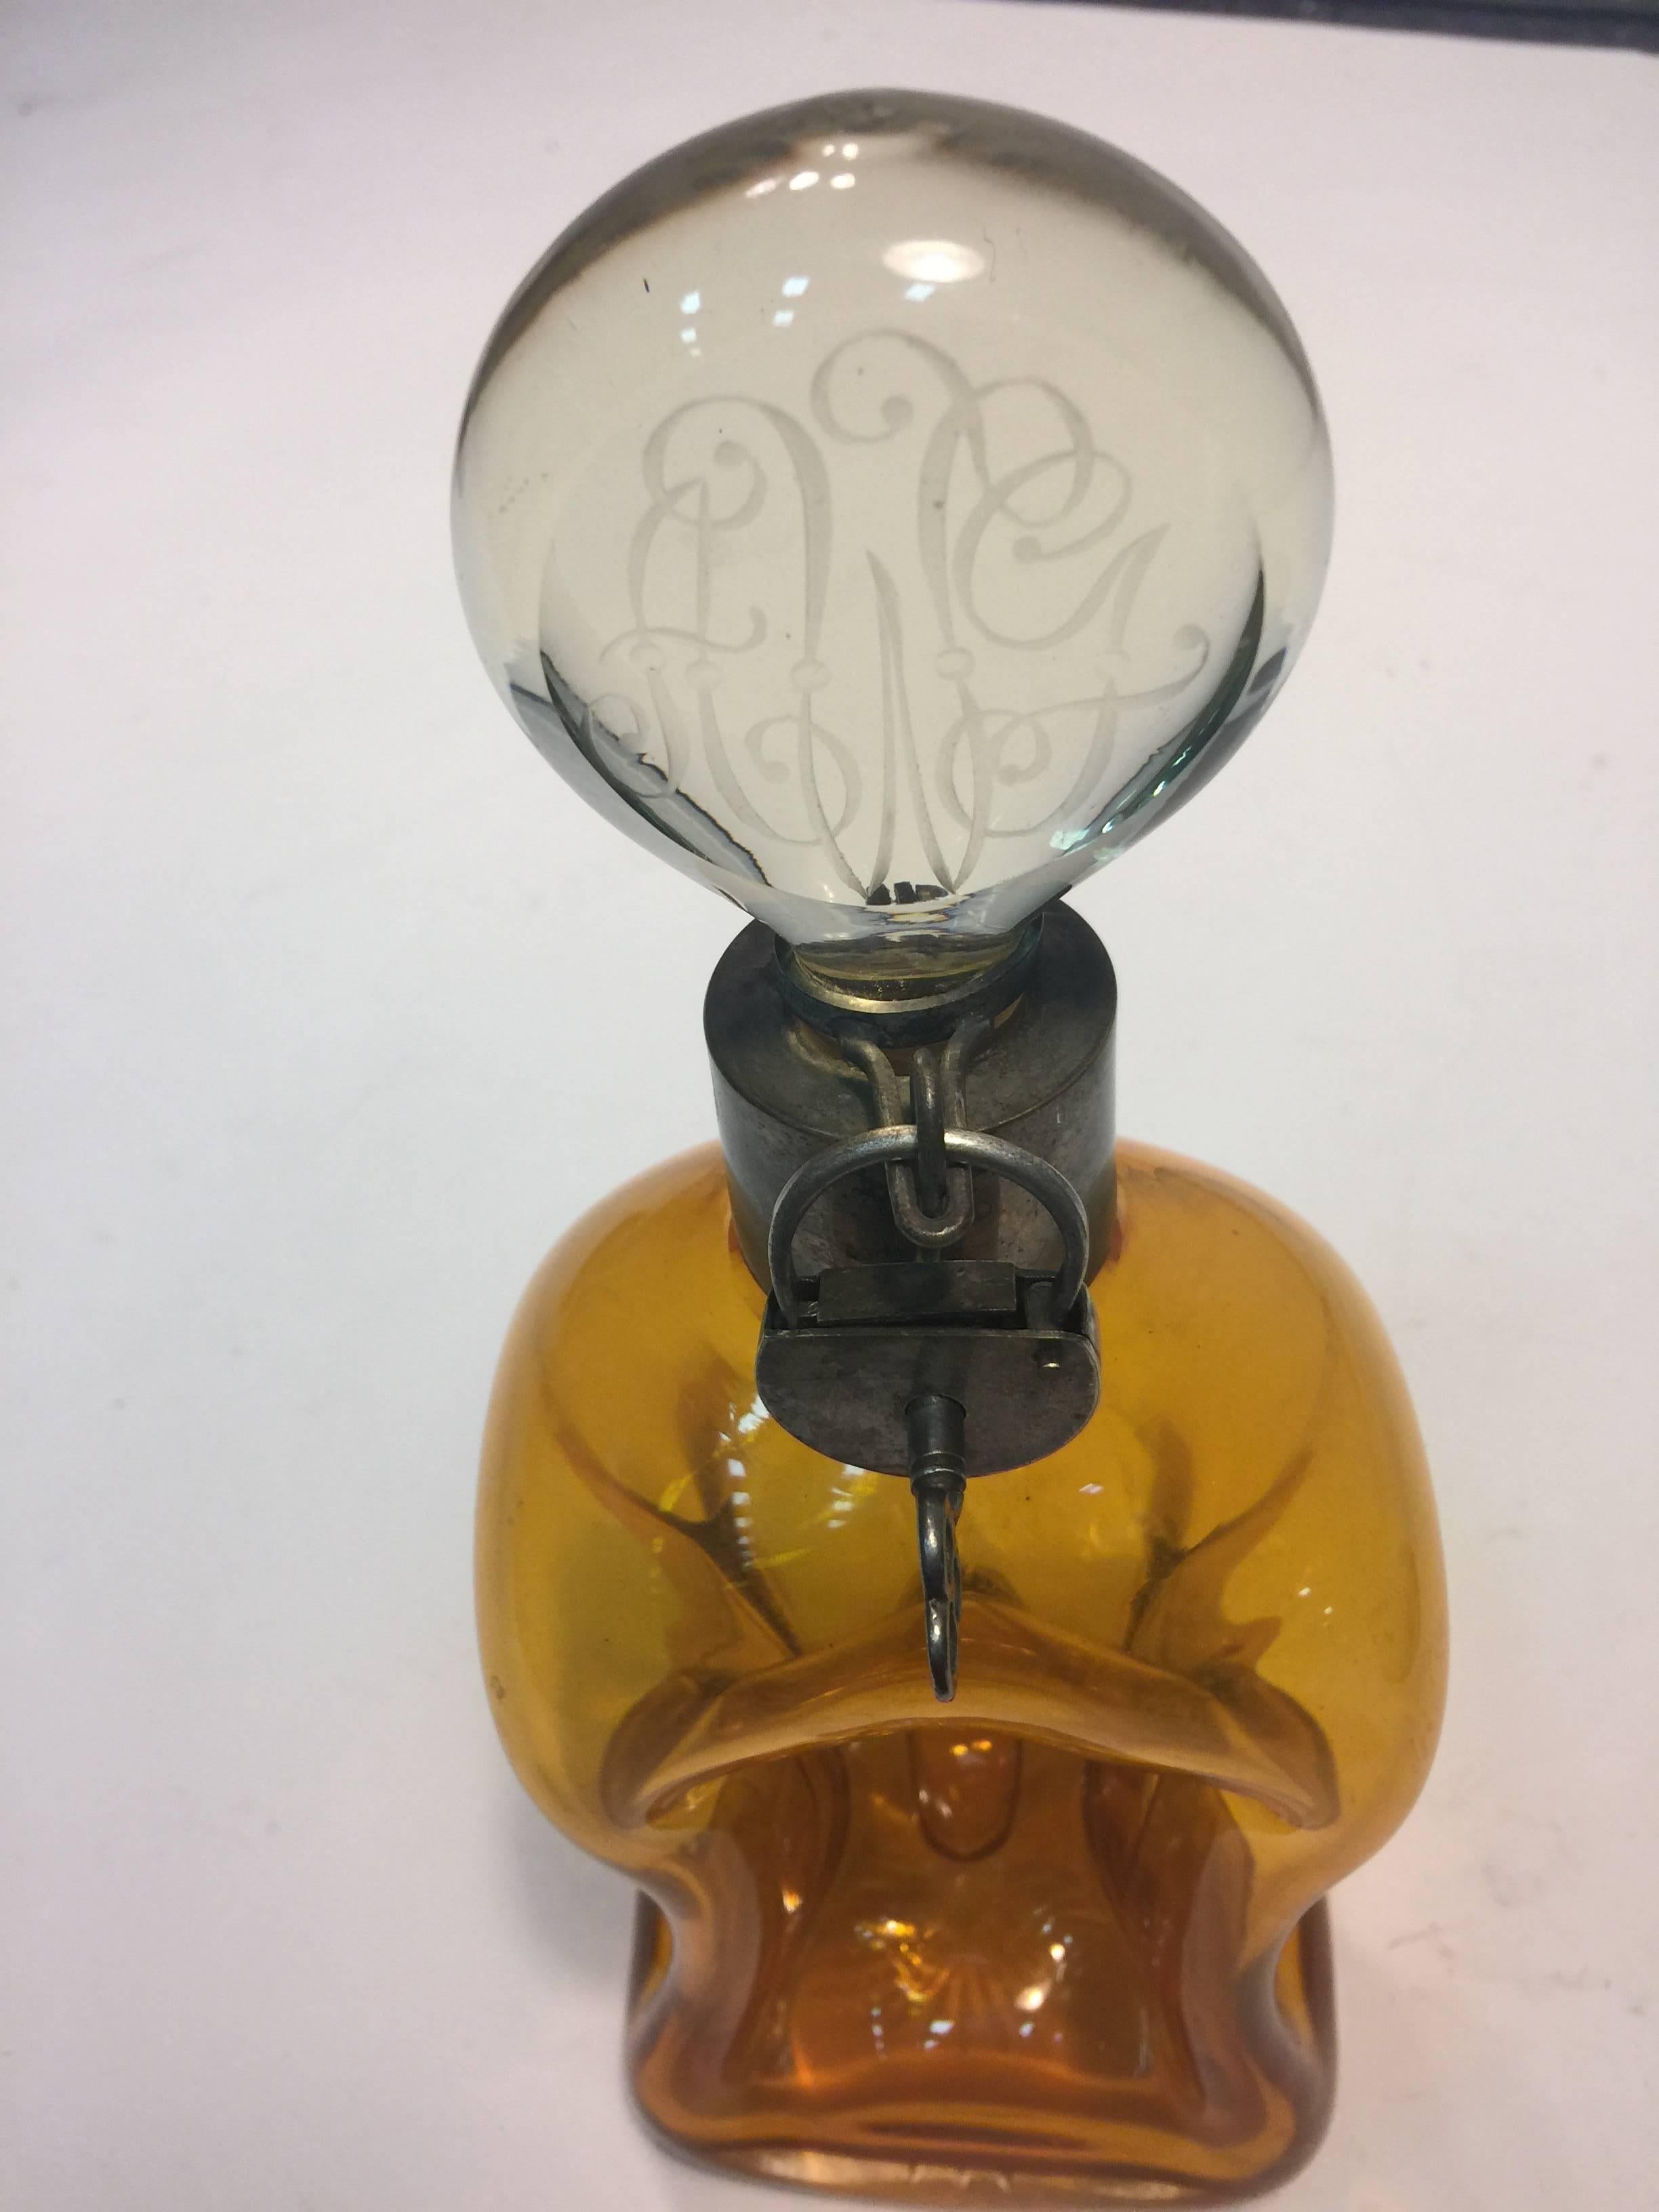 Art Nouveau amber glass decanter, circa 1900 with handmade silver metal lock and key and collar. Marked Austria on collar. The skeleton key unlocks and locks to access the clear glass stopper.